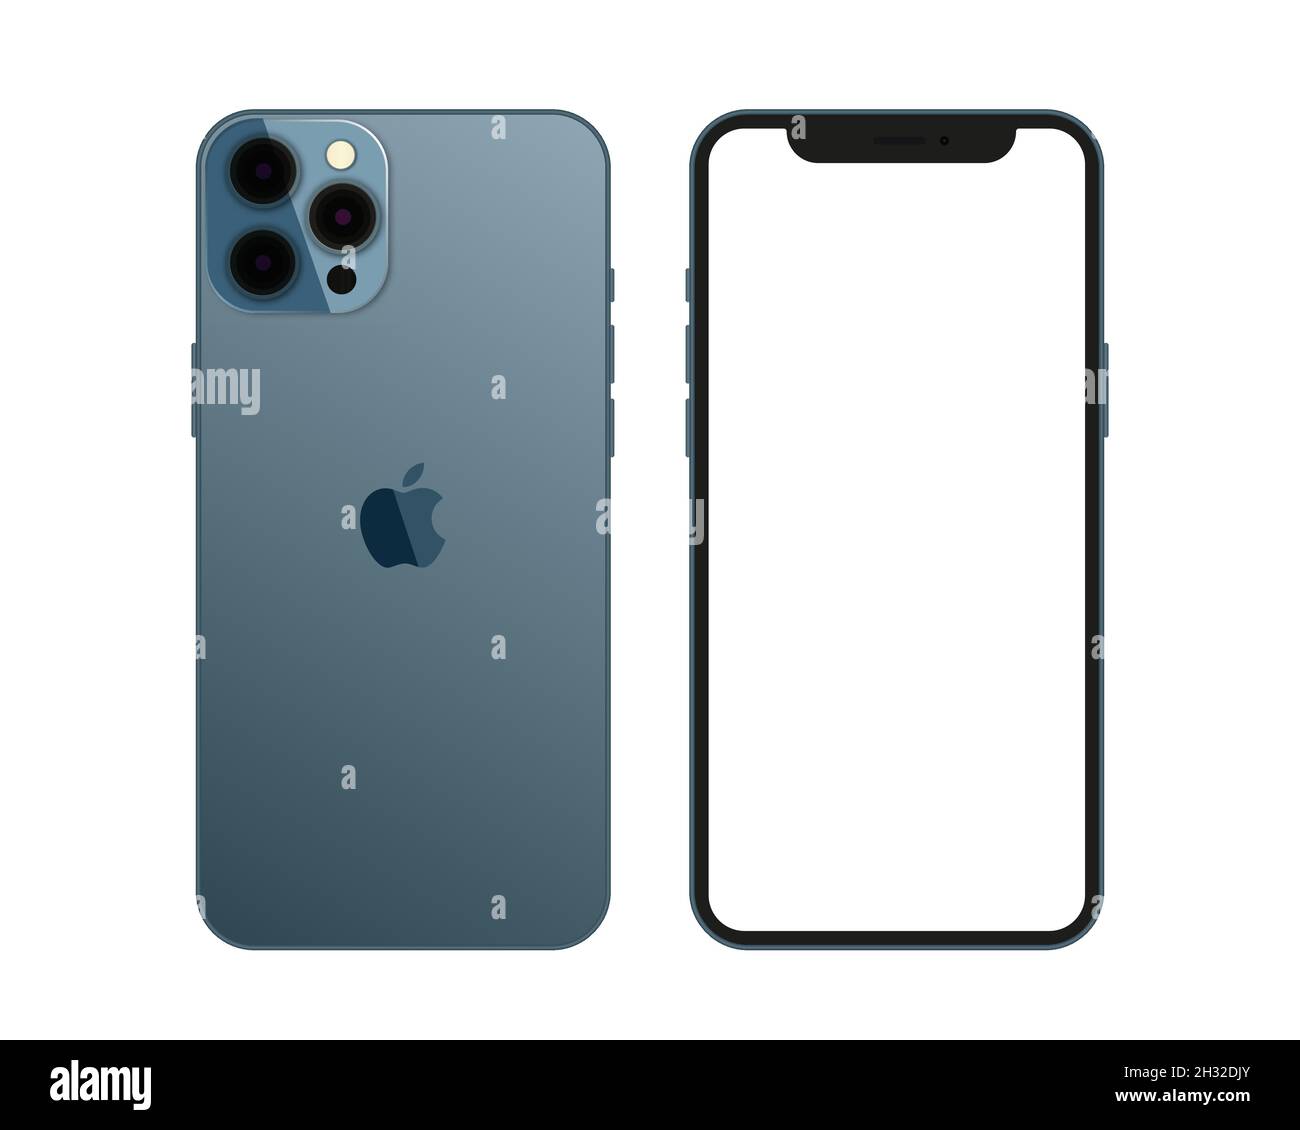 New iphone 12 pro / pro max by Apple Inc. Mock-up screen iphone and back side iphone. Vector illustration eps10  Stock Vector